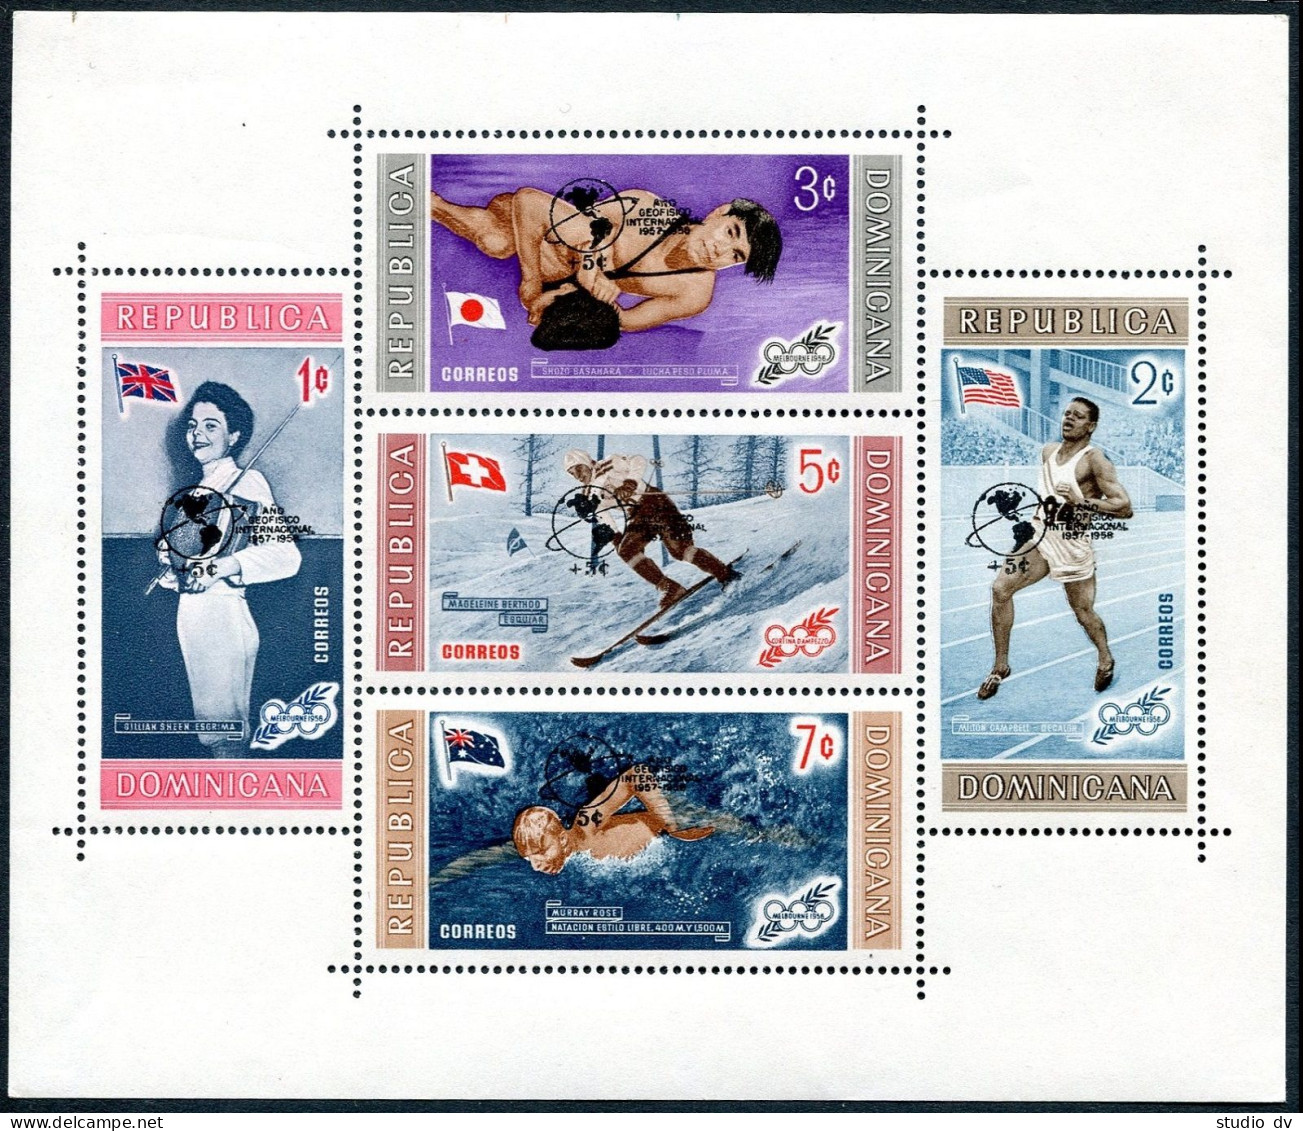 Dominican Rep B25a,CB15a Perf,imperf,MNH. 1959.IGY-1957.Olympics Melbourne-1956. - Dominican Republic